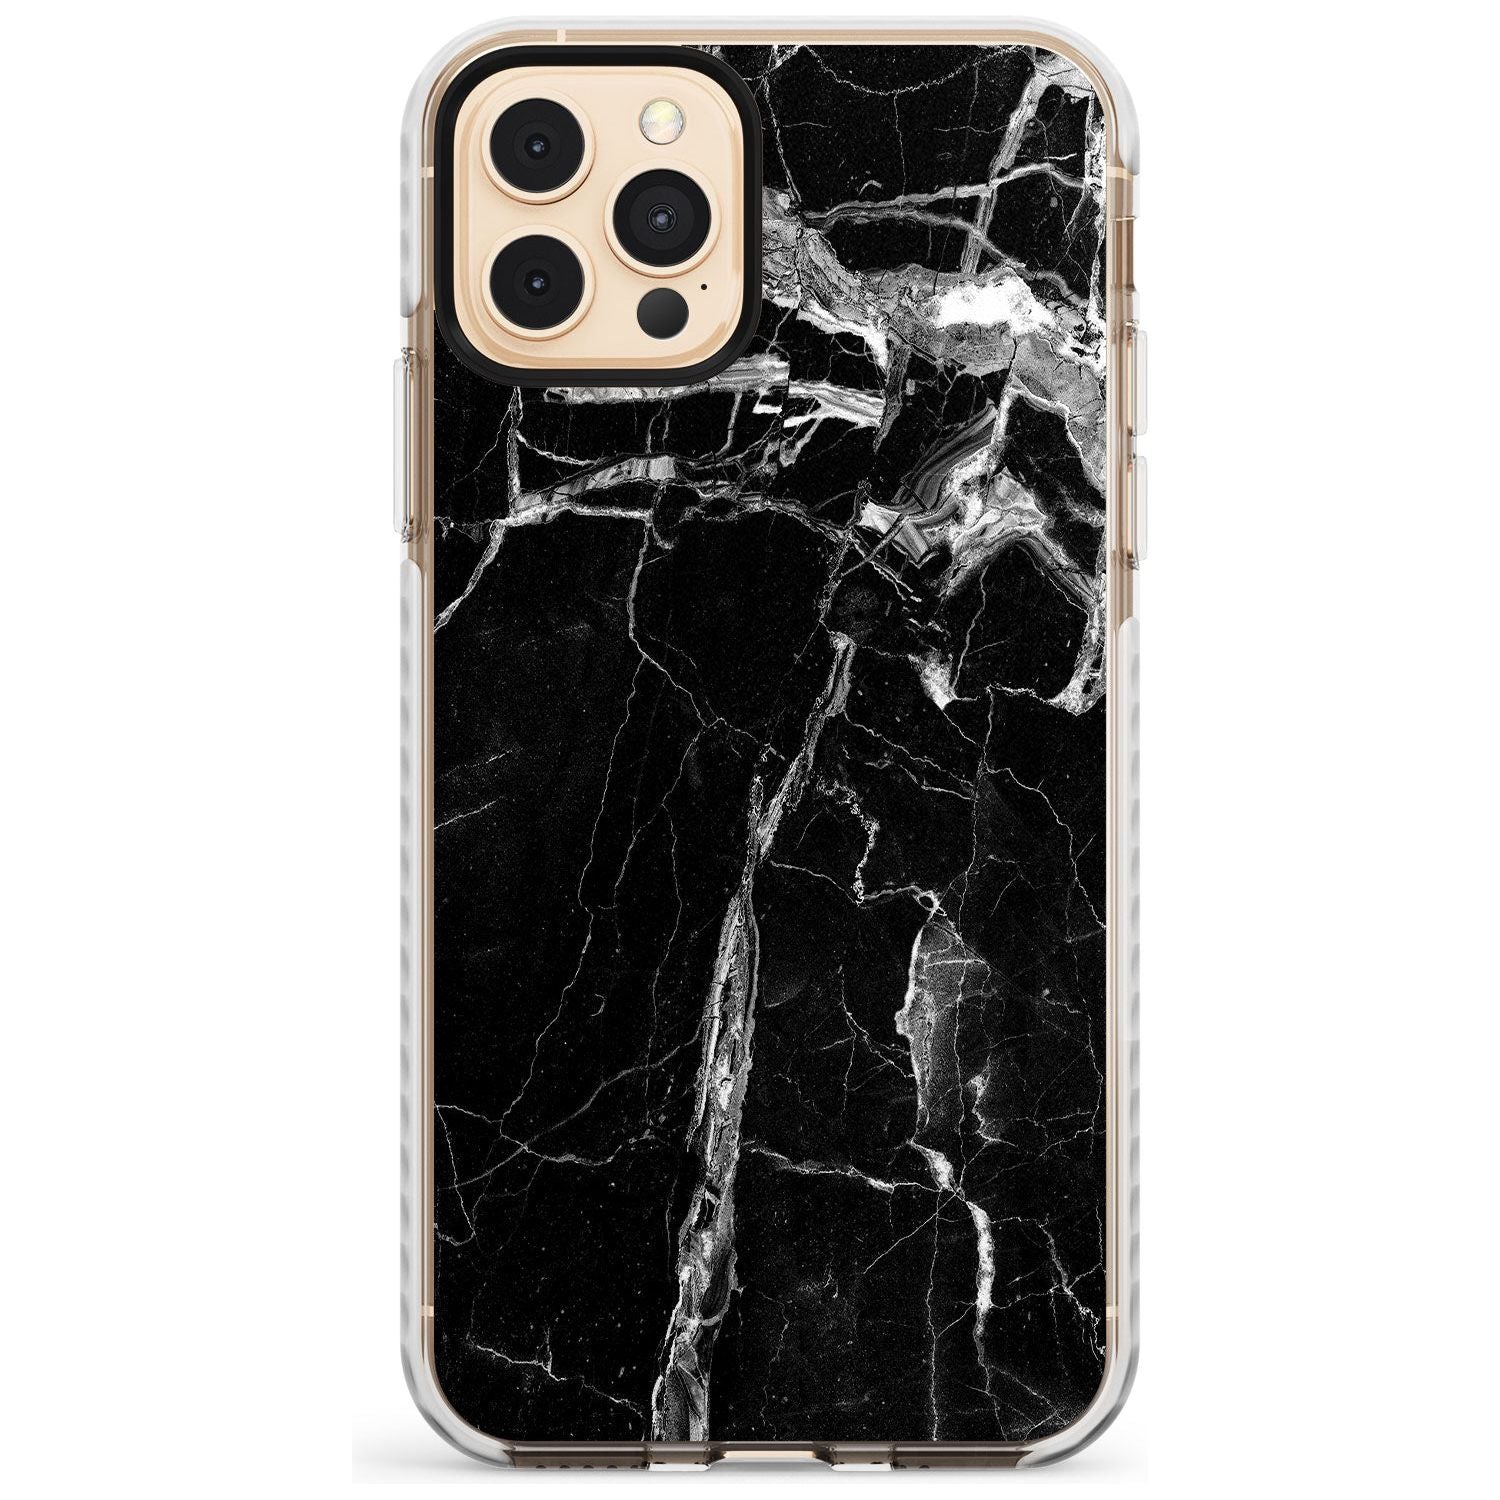 Black Onyx Marble Texture Slim TPU Phone Case for iPhone 11 Pro Max